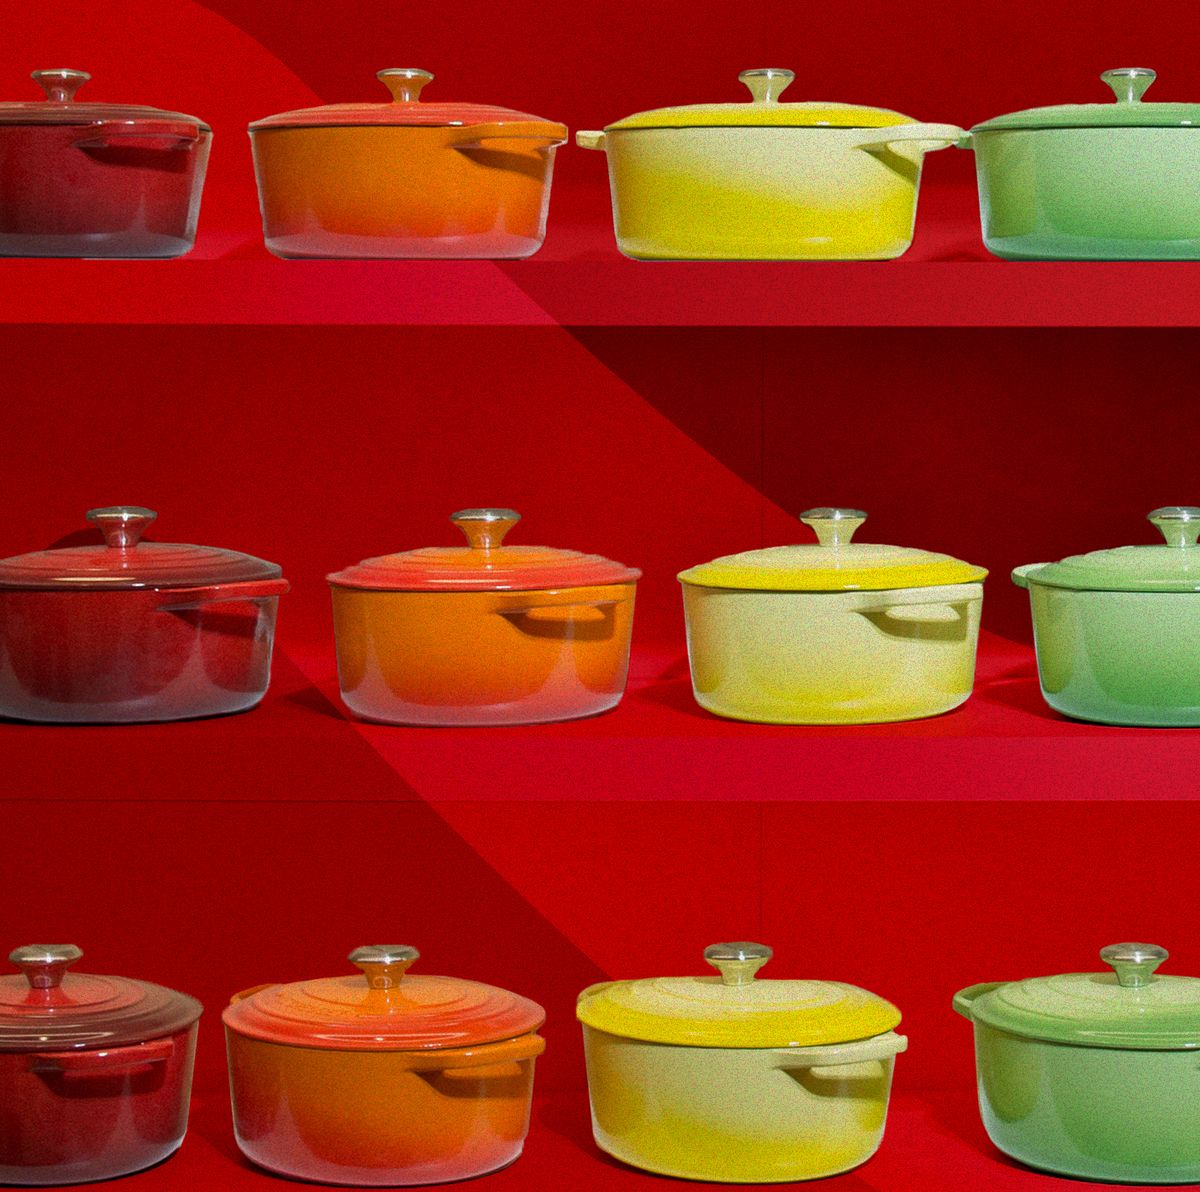 Le Creuset Just Dropped a New Colorway That Screams Fall – SheKnows, le  creuset 